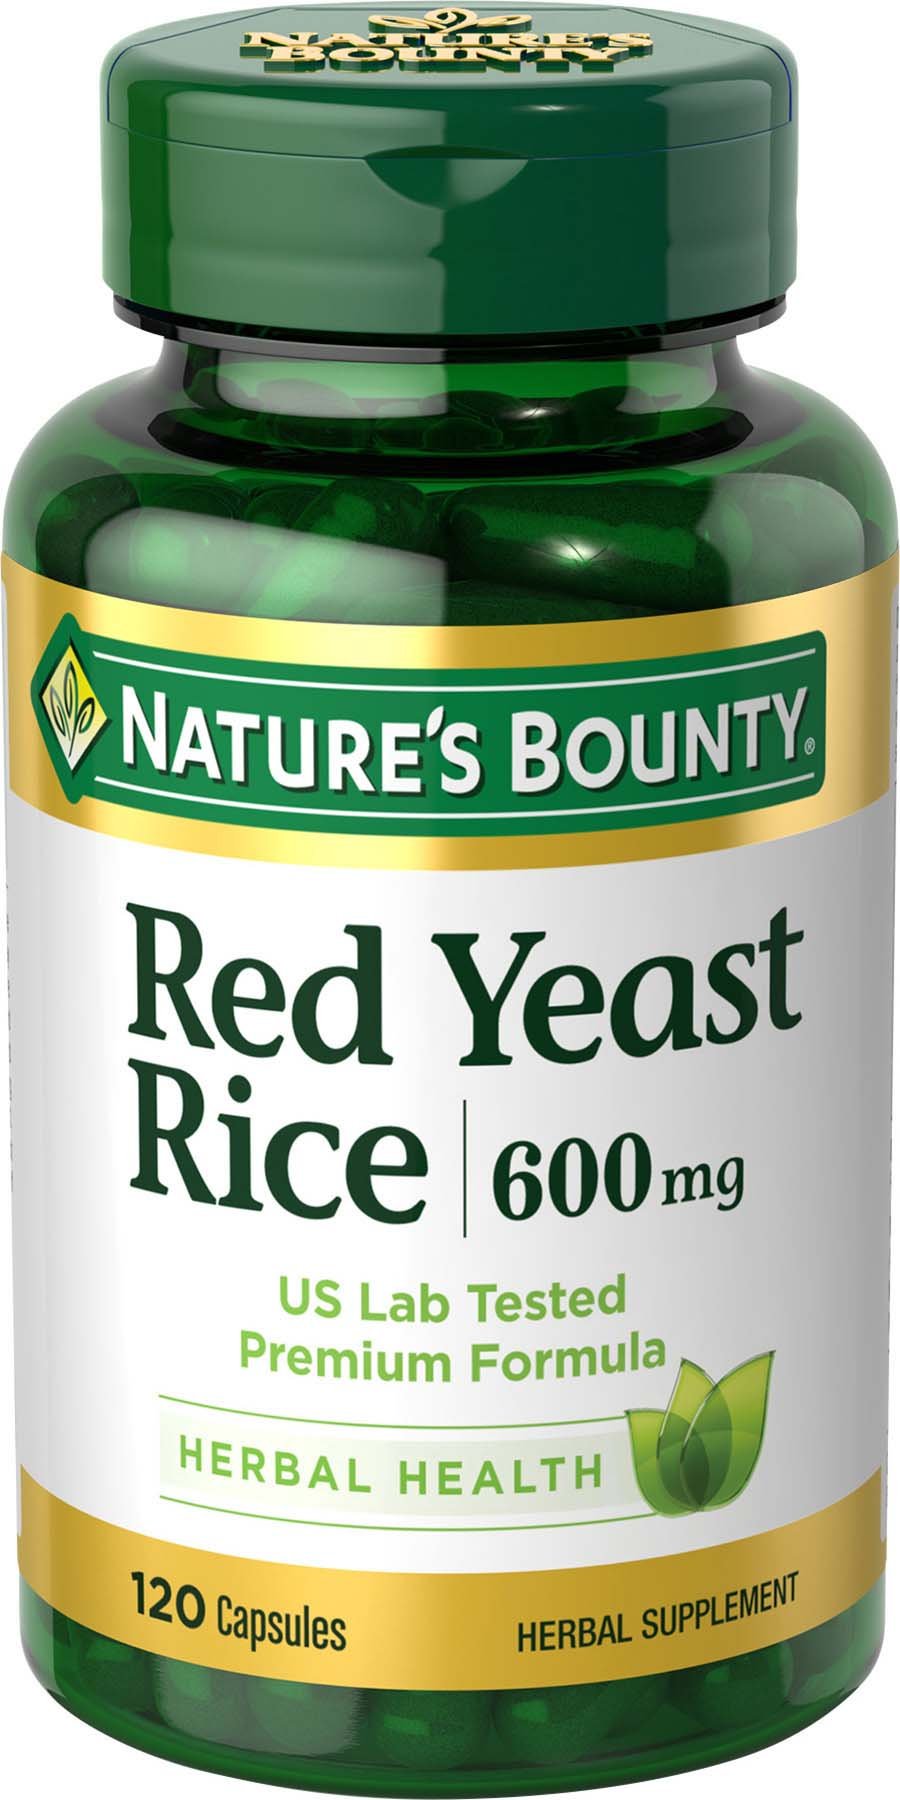 Nature's Bounty Red Yeast Rice Pills and Herbal Health Supplement, Dietary Additive, 600mg, 120 Capsules